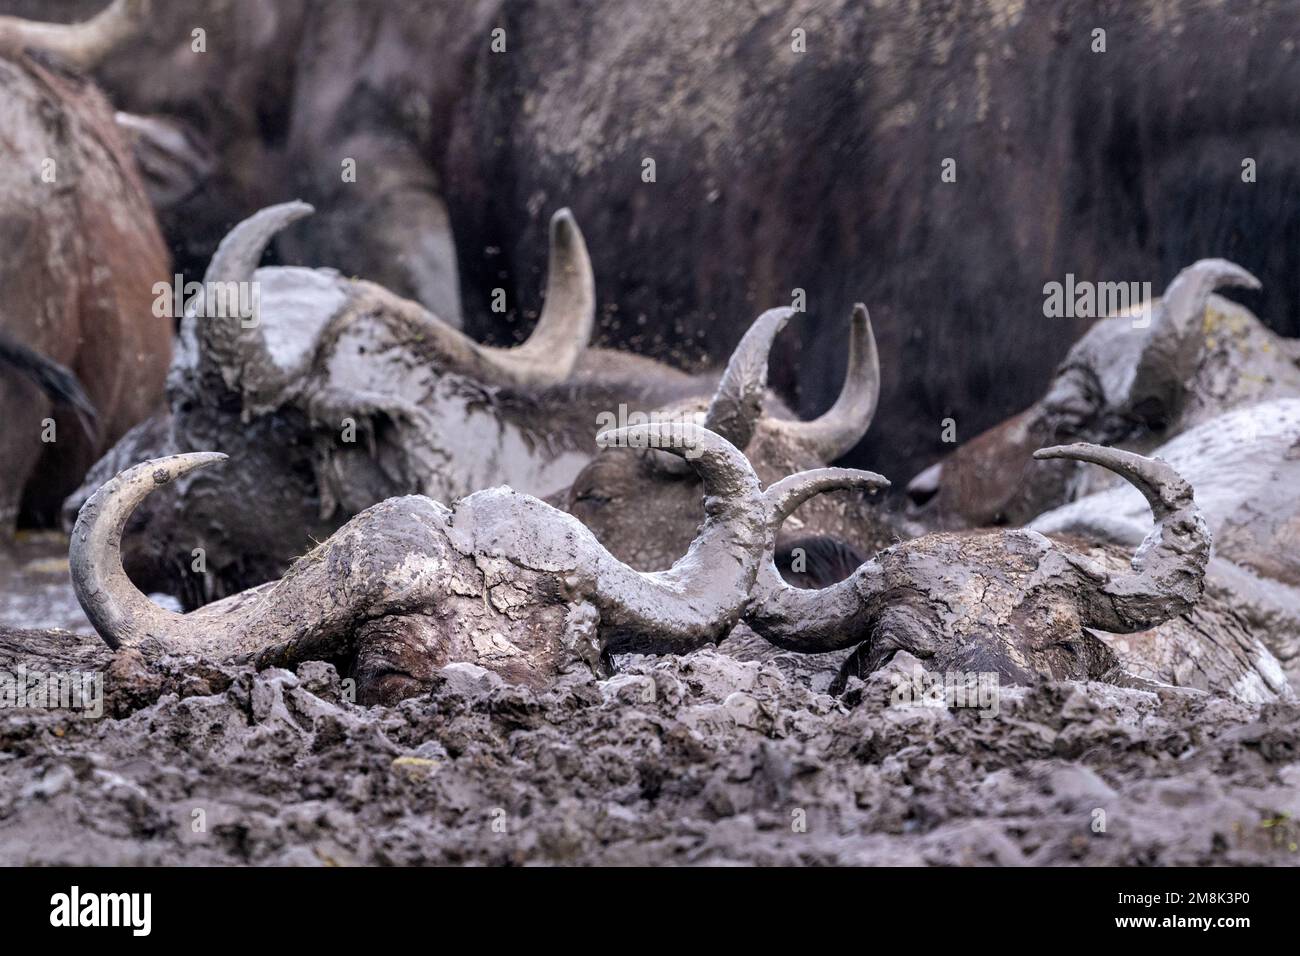 Wild buffalo wallowing in a mud pool in a National Park in Uganda, East Africa. Stock Photo